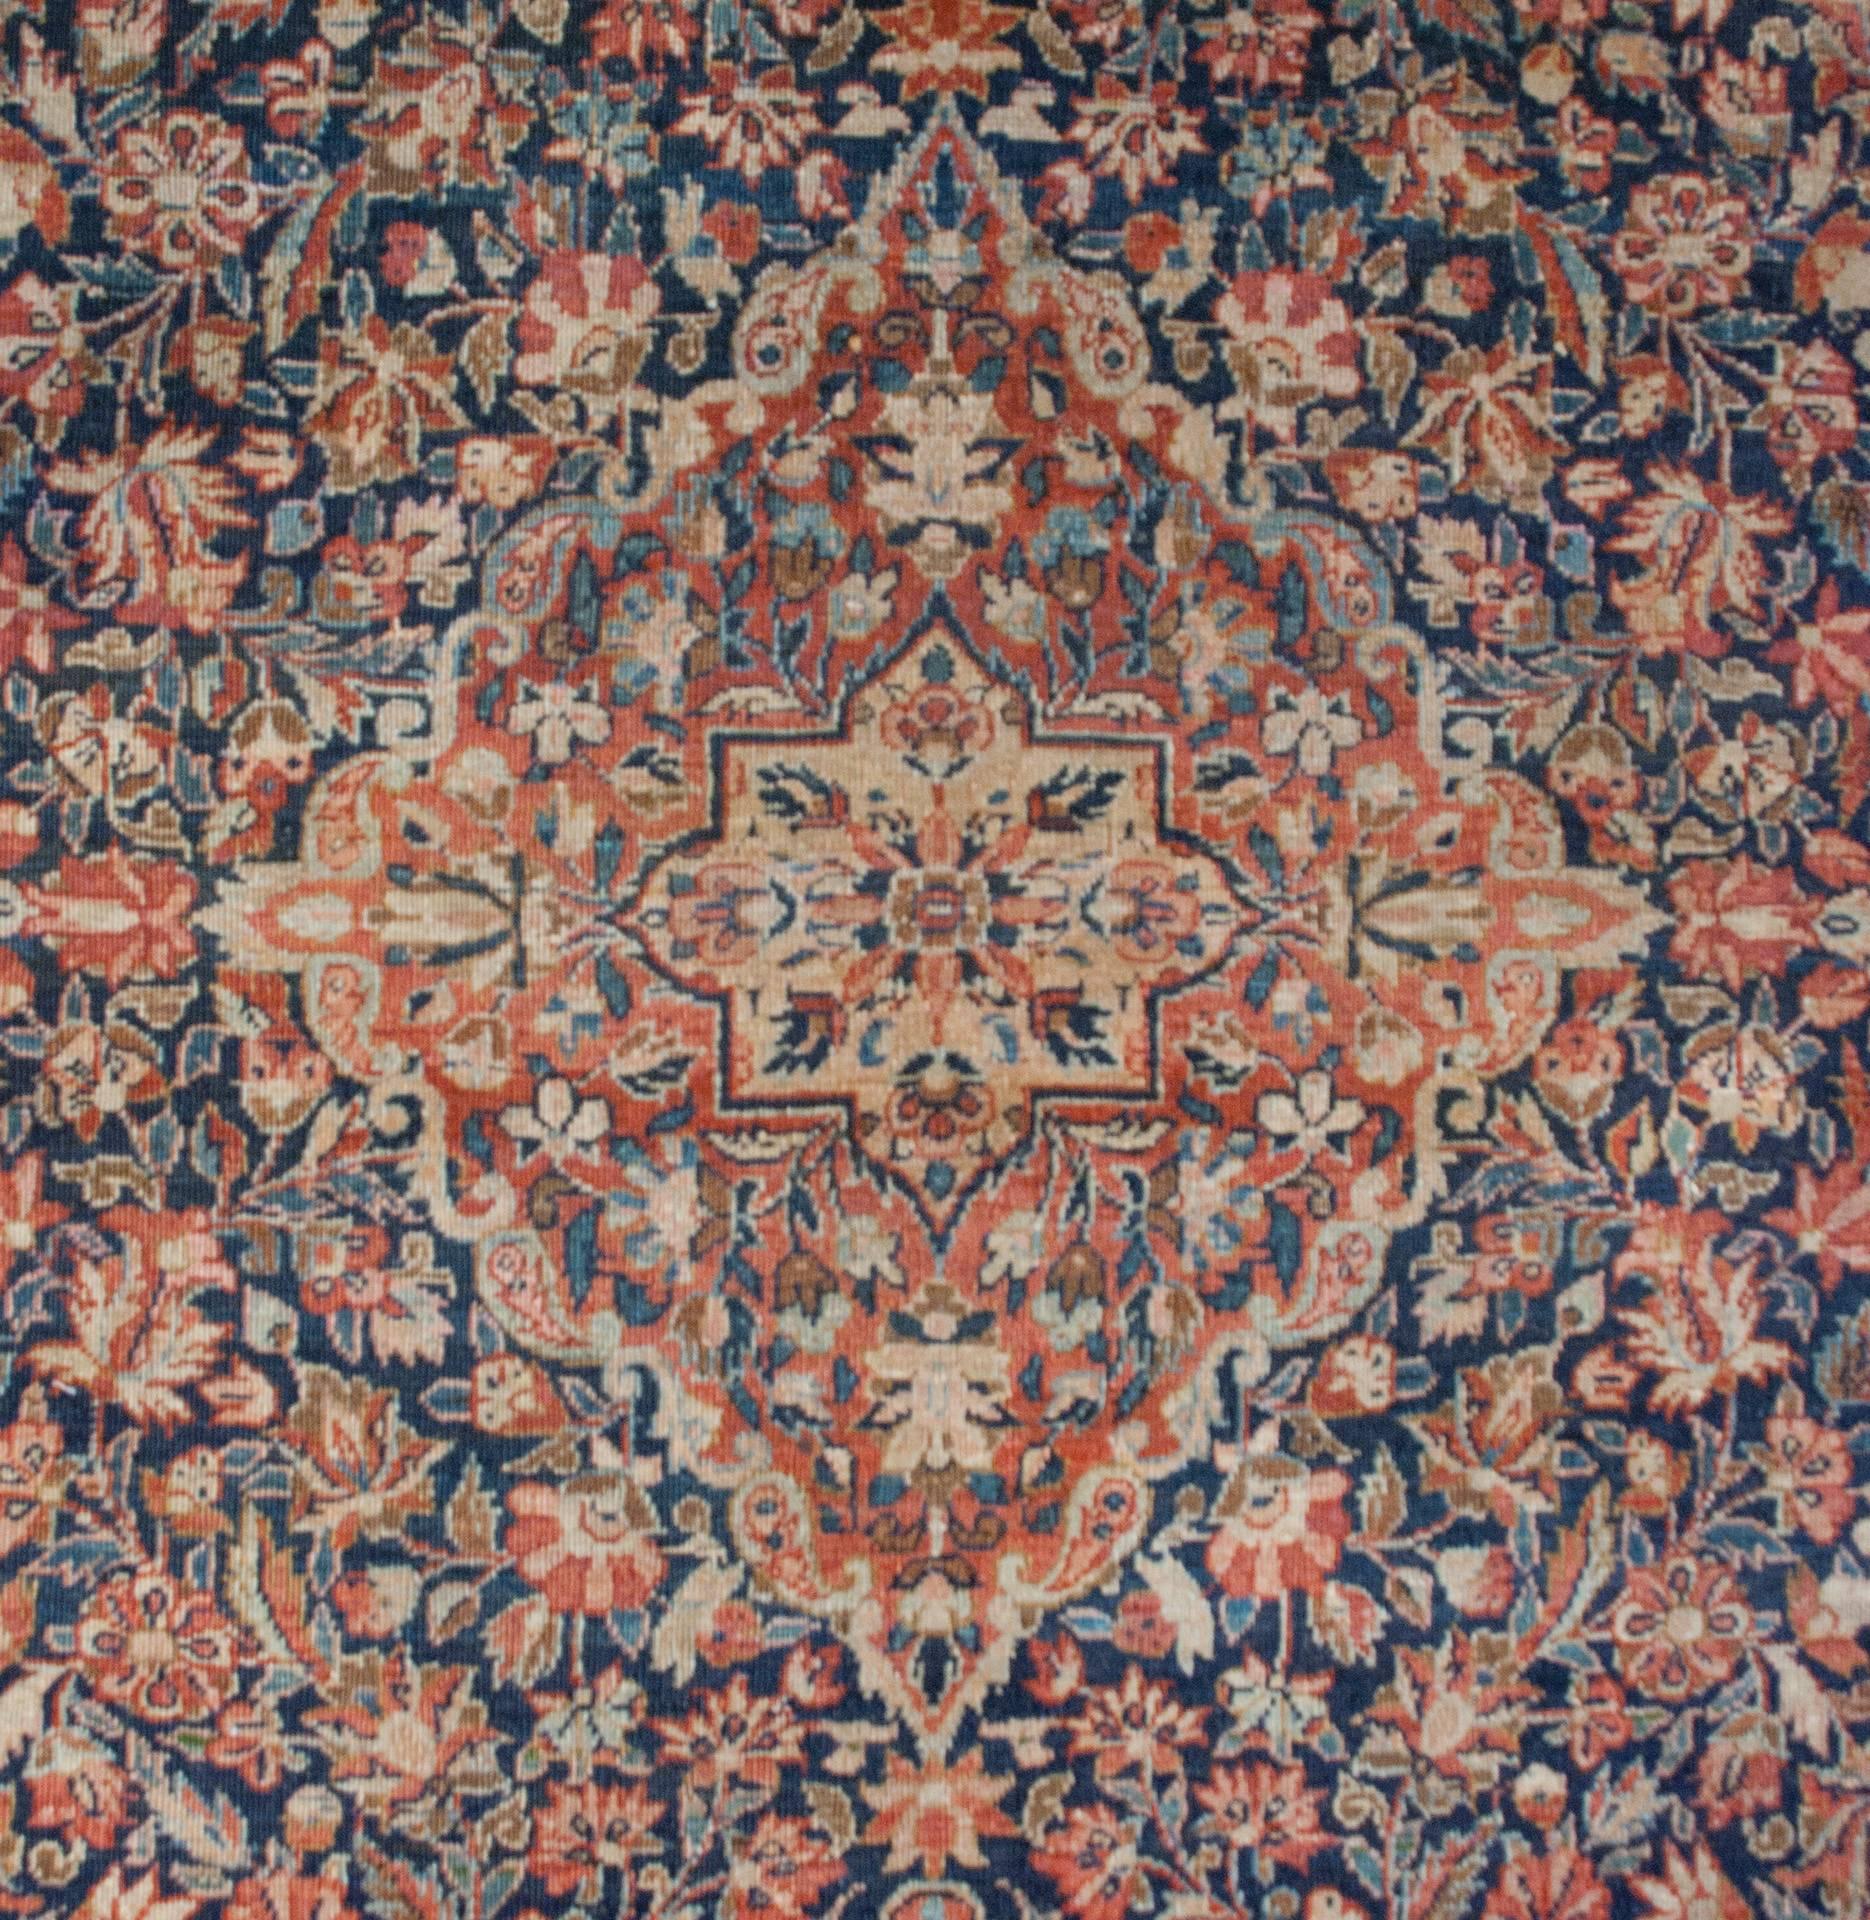 An amazing late 19th century Persian Tabriz rug with an intensely woven multicolored floral pattern in crimson, indigo, turquoise and natural undyed wool with a large central diamond shaped medallion amidst a field of multi-species flowers